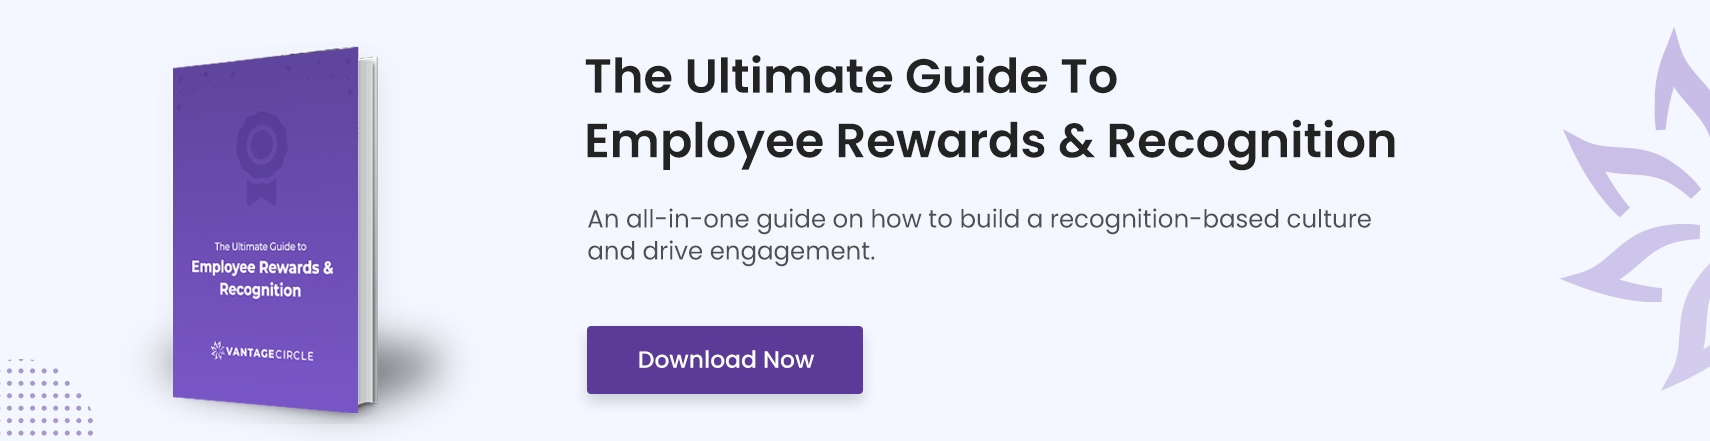 employee-rewards-and-recognition-banner